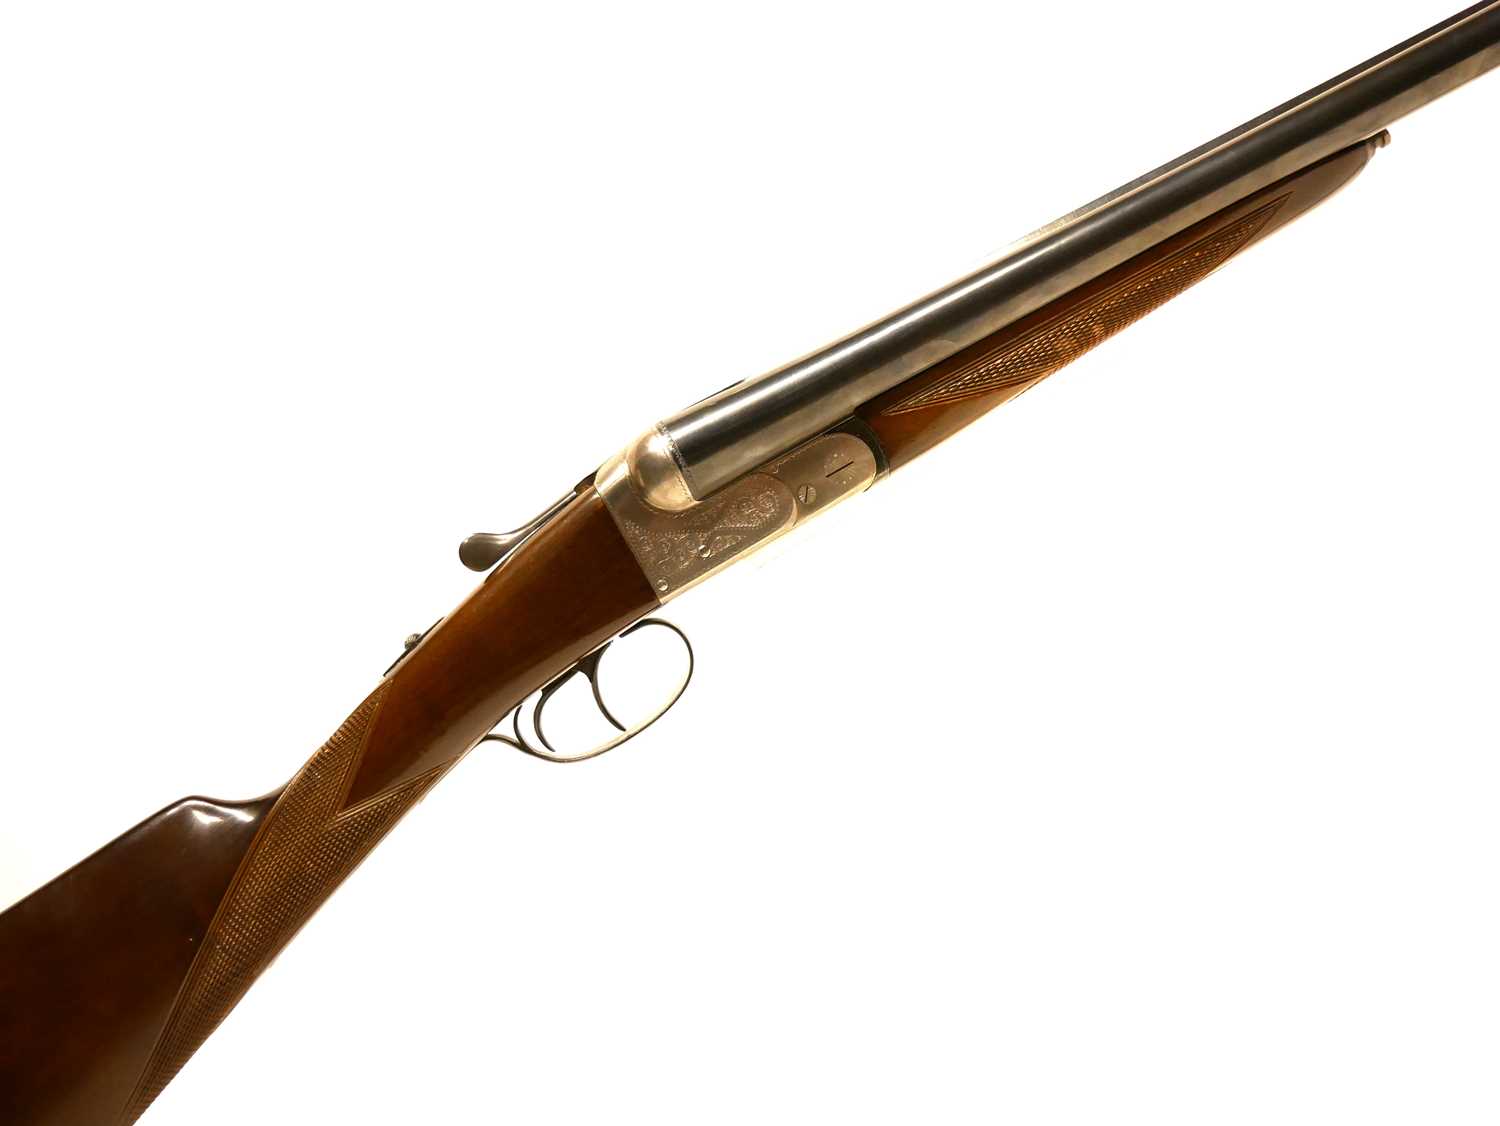 Lot 194 - Parker Hale 12 bore side by side shotgun LICENCE REQUIRED